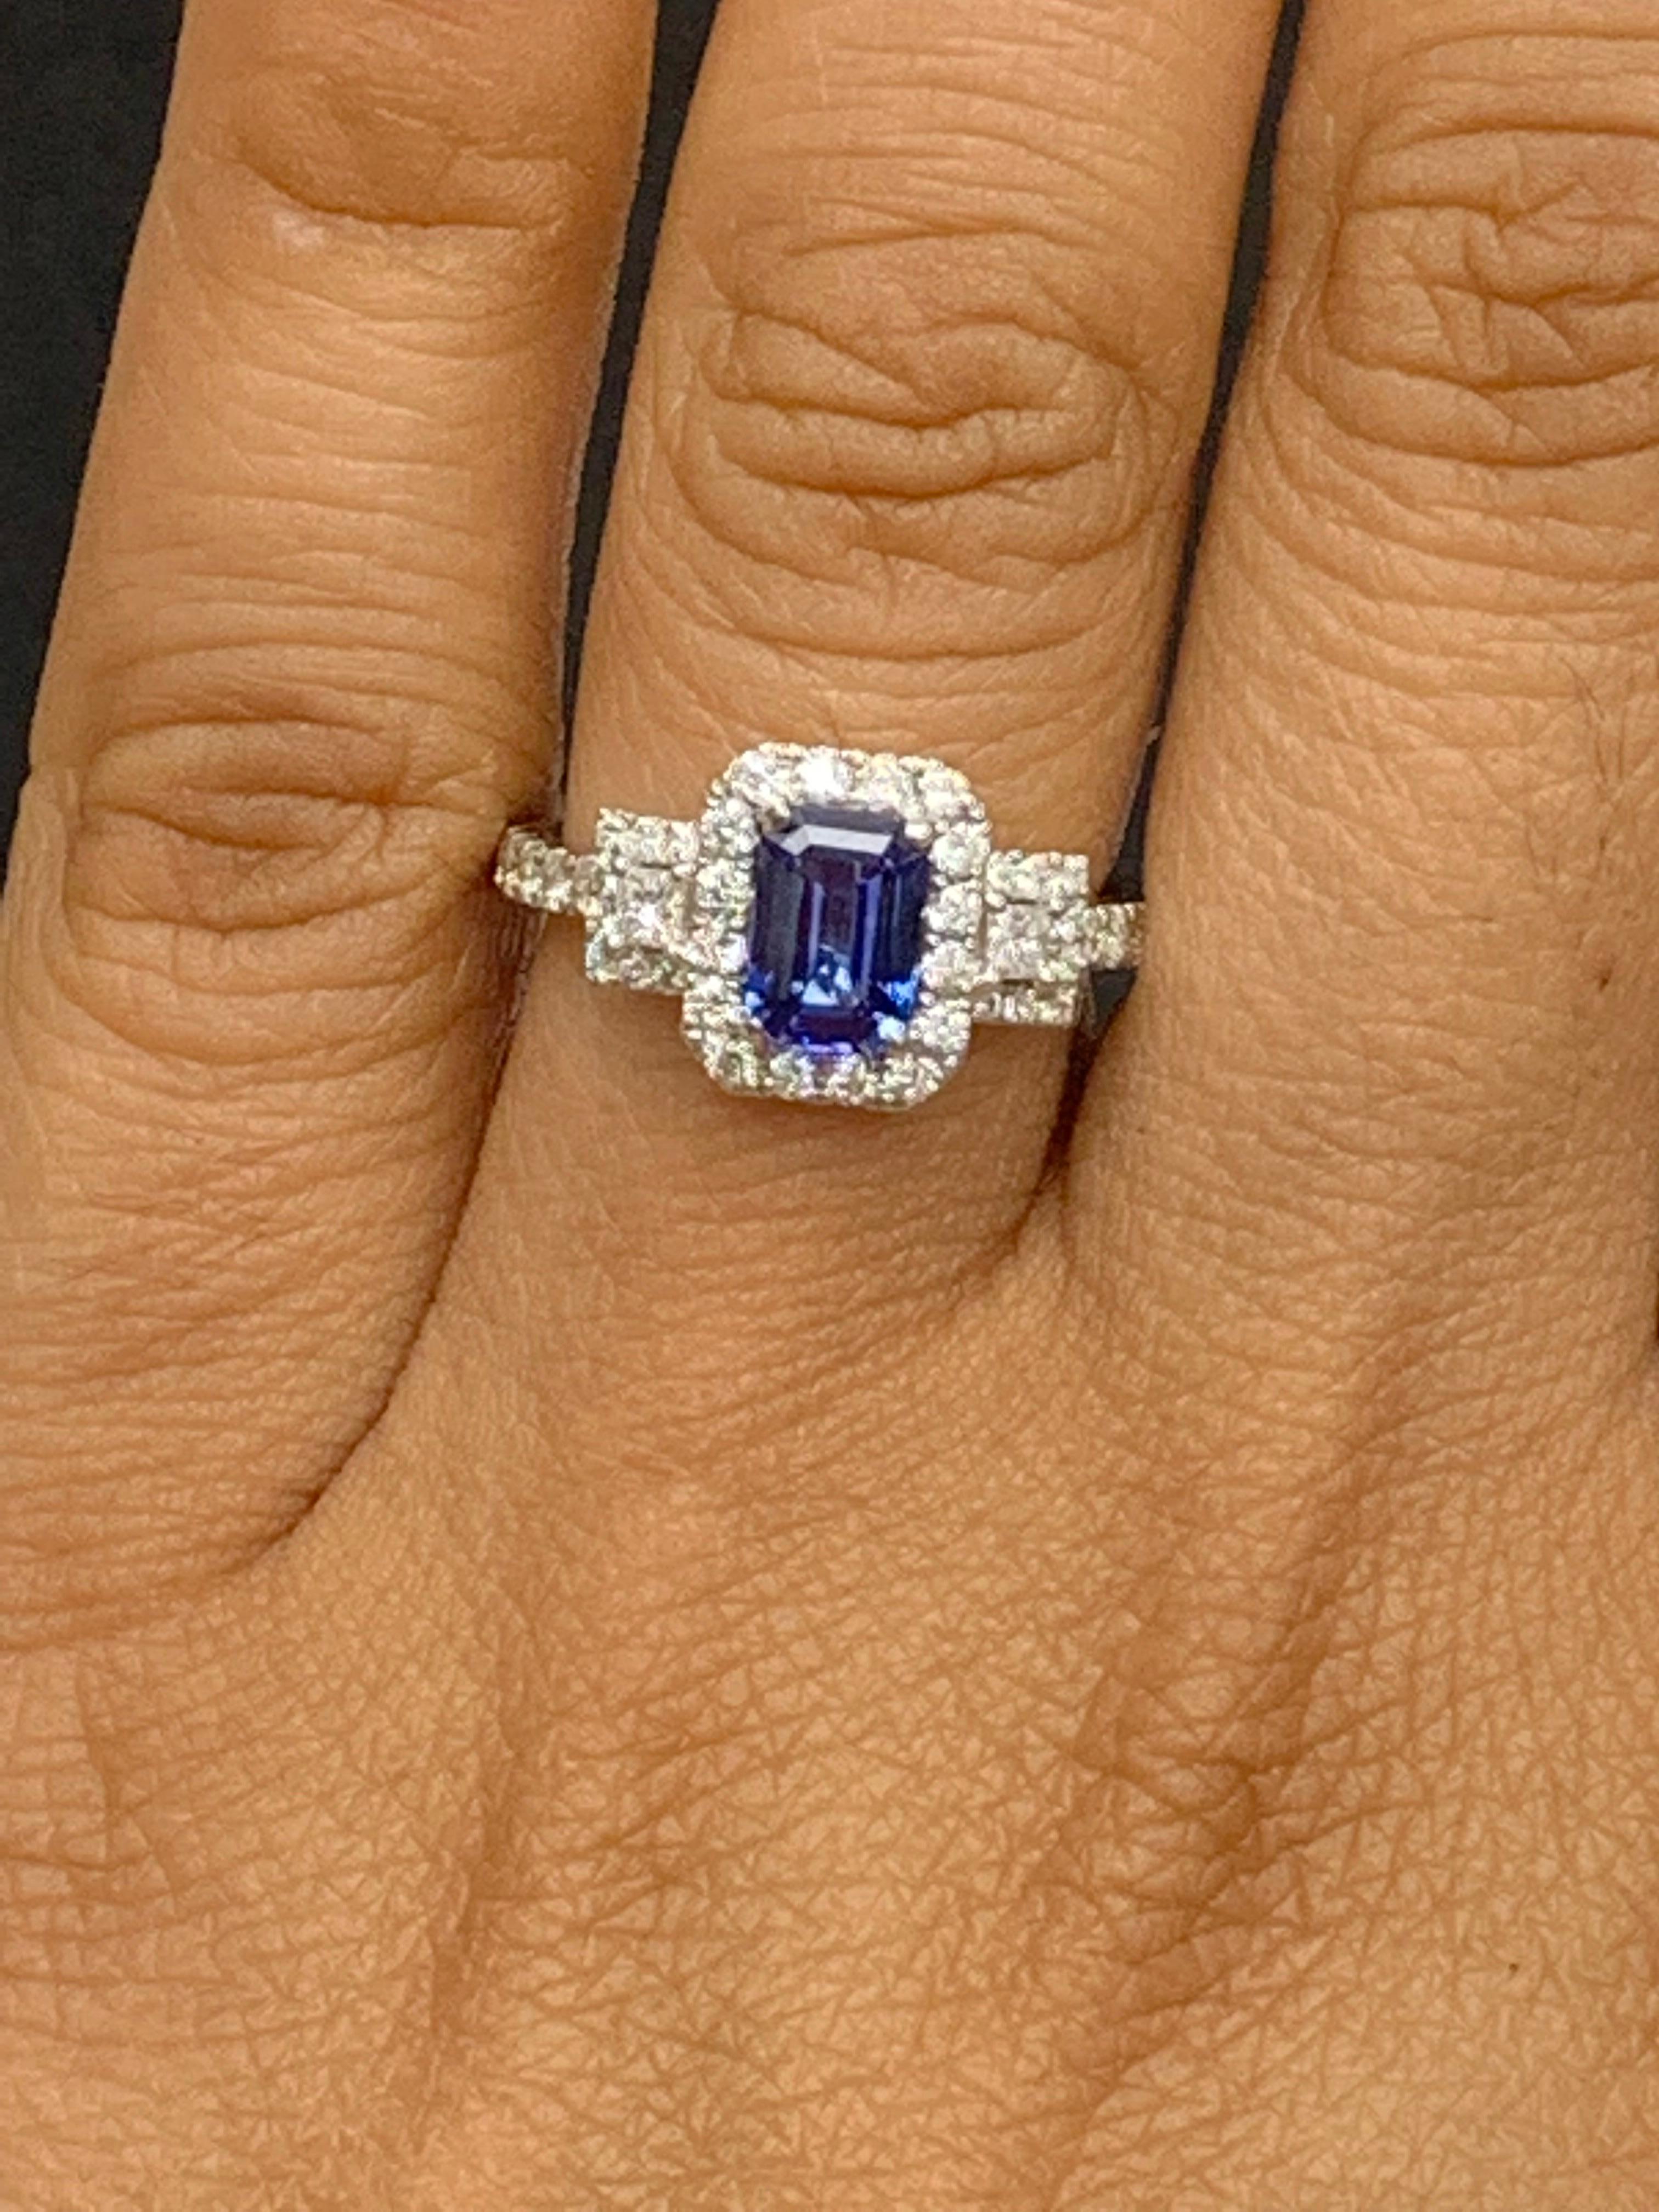 Women's 1.14 Carat Emerald Cut Sapphire and Diamond Halo Ring in 18K White Gold For Sale